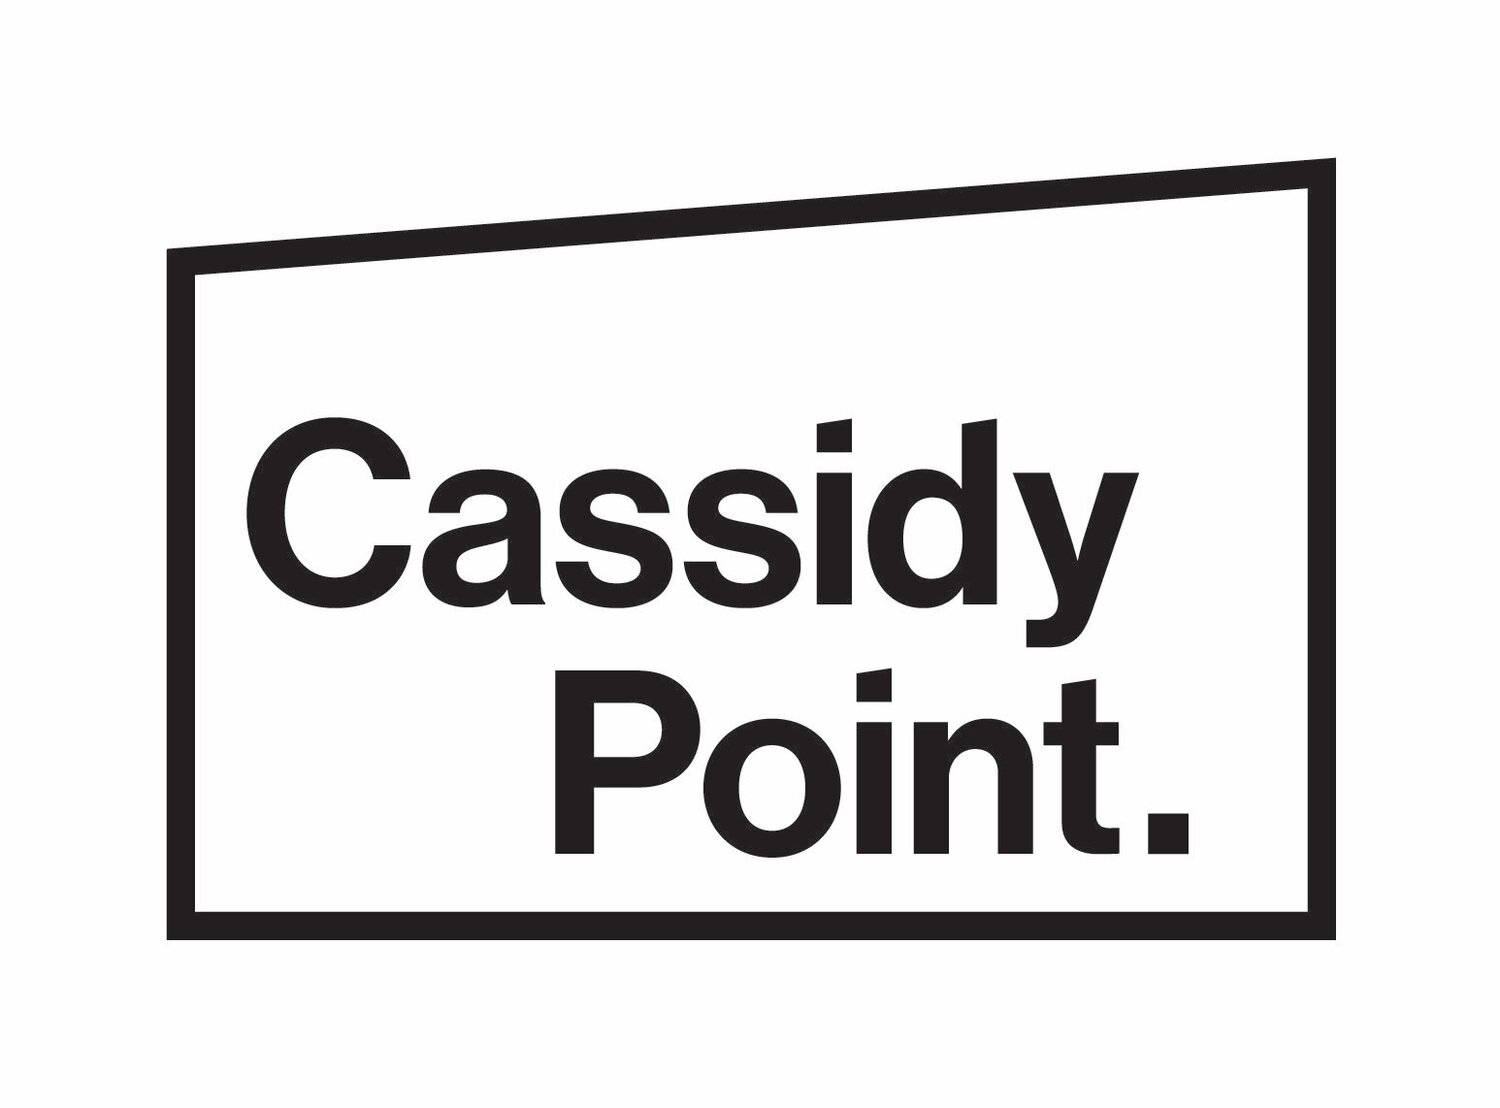 Cassidy Point.